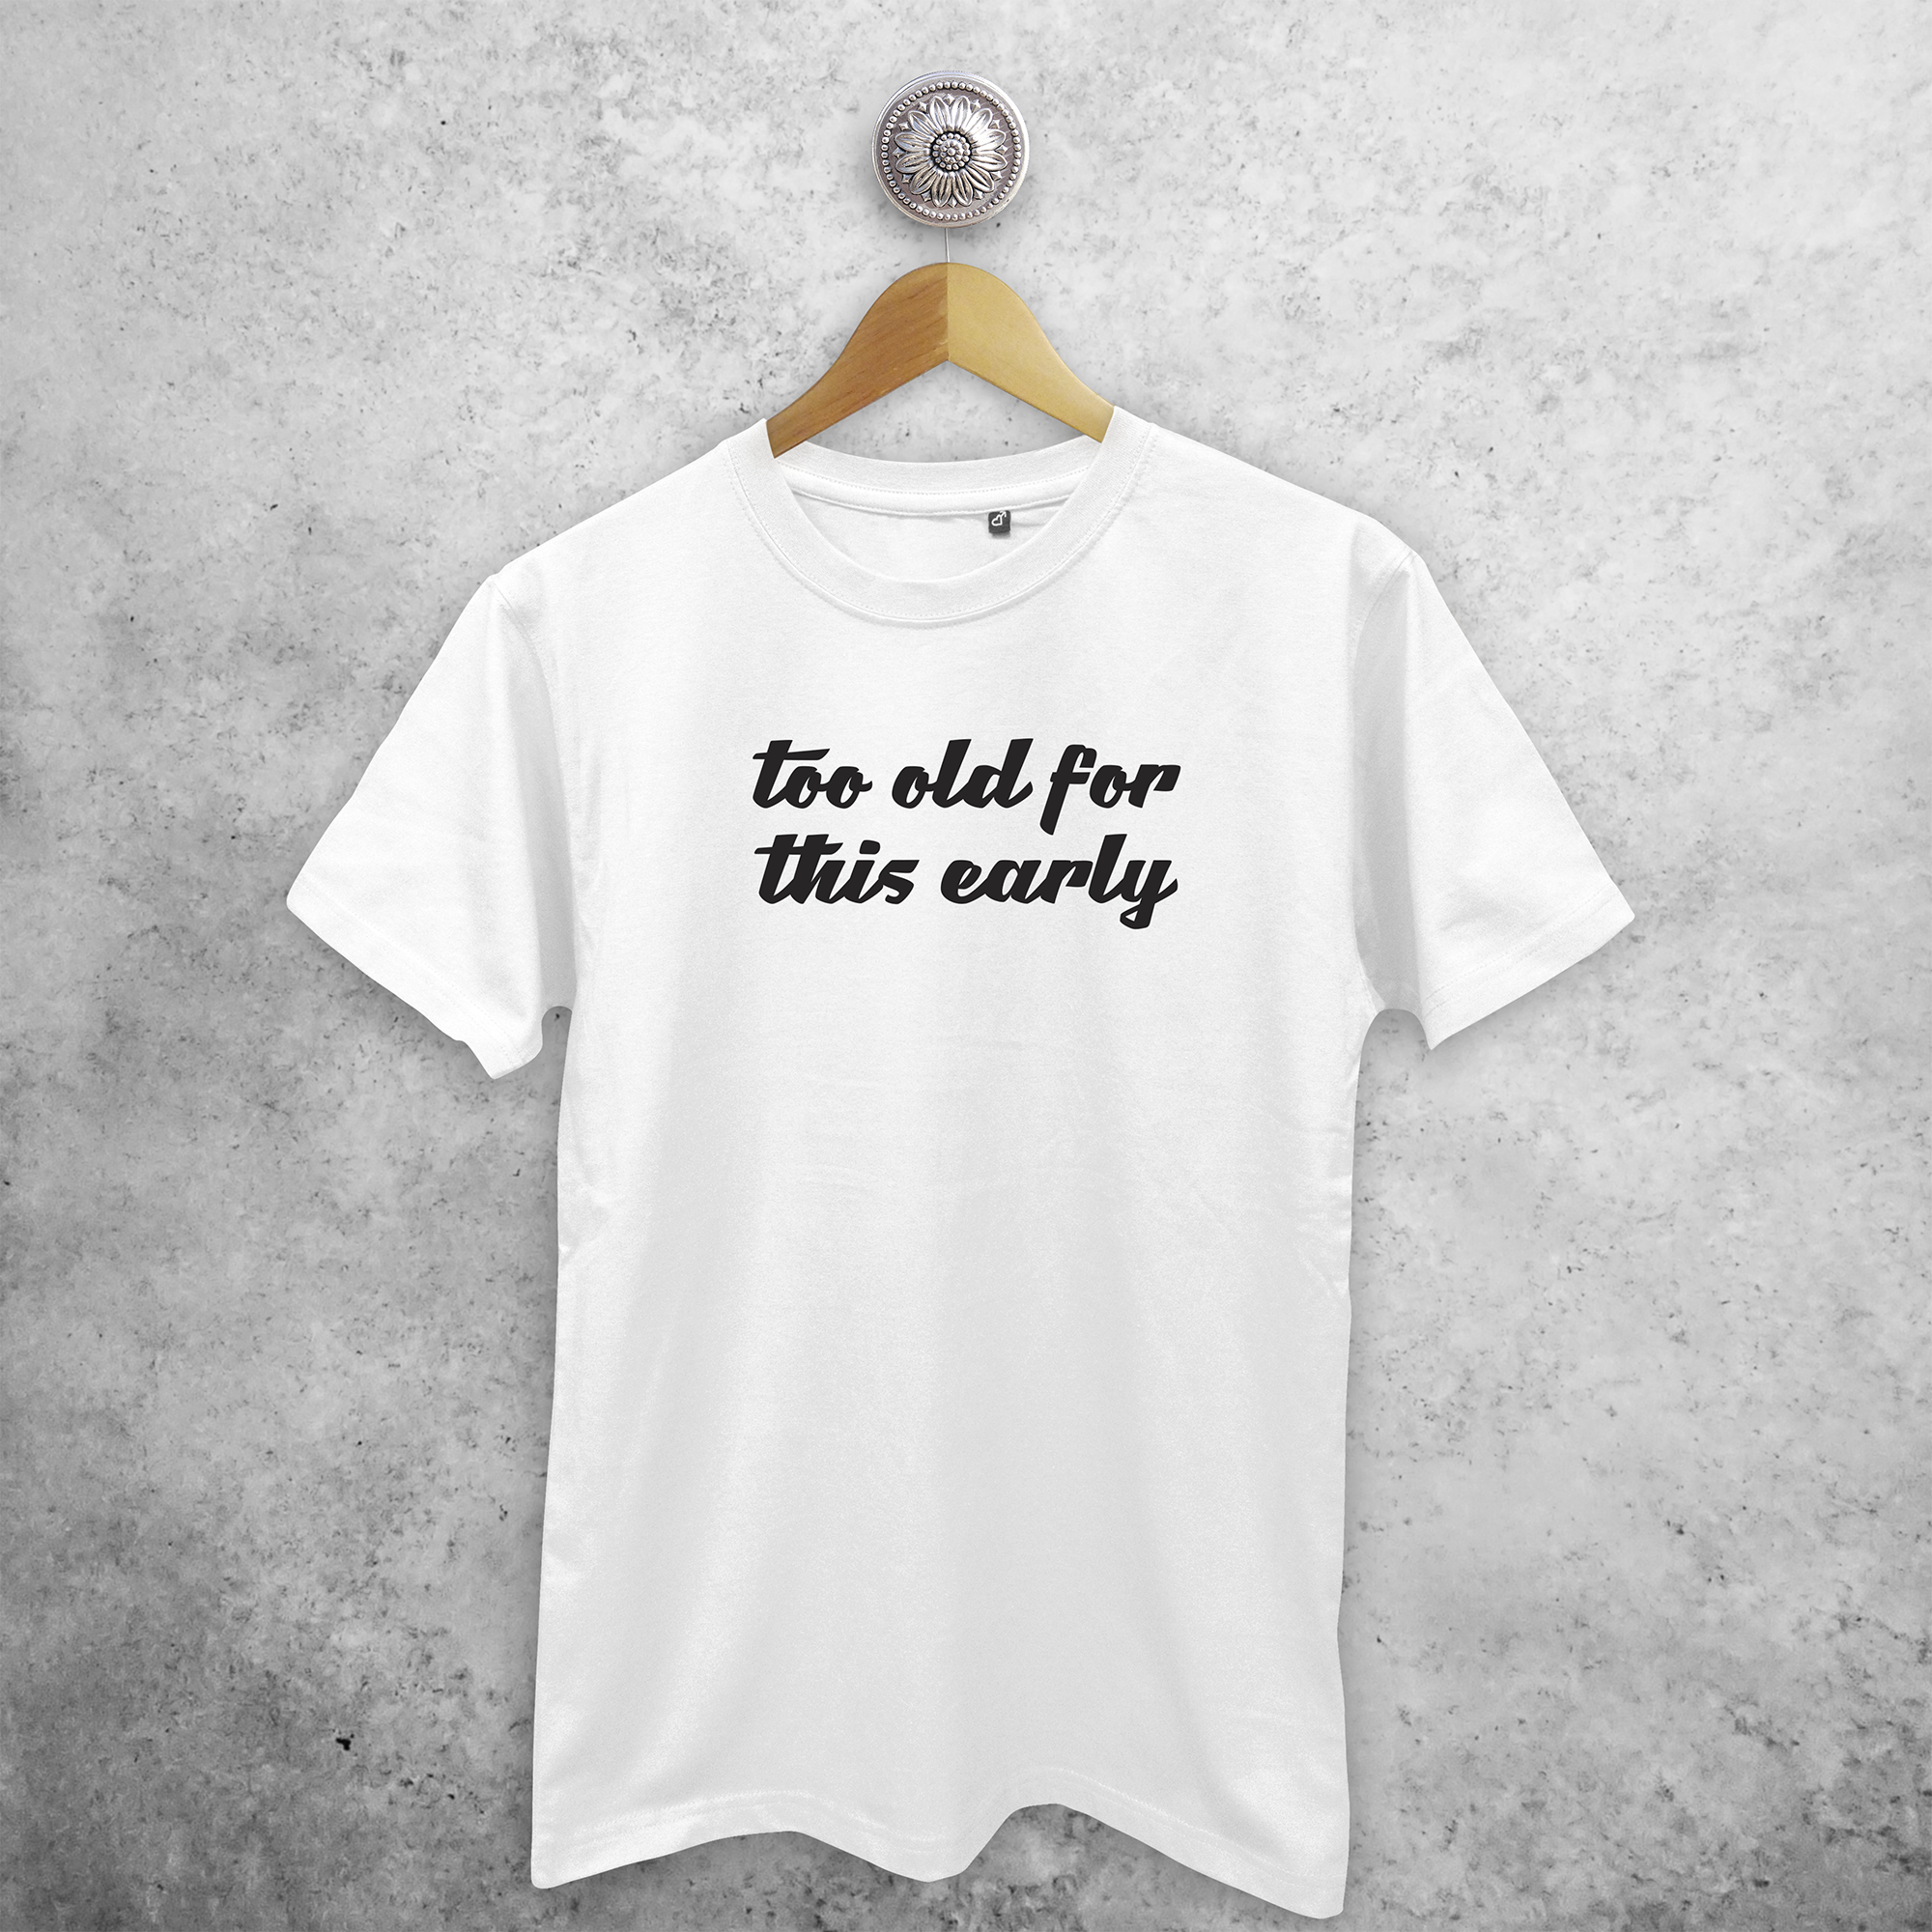 'Too old for this early' adult shirt